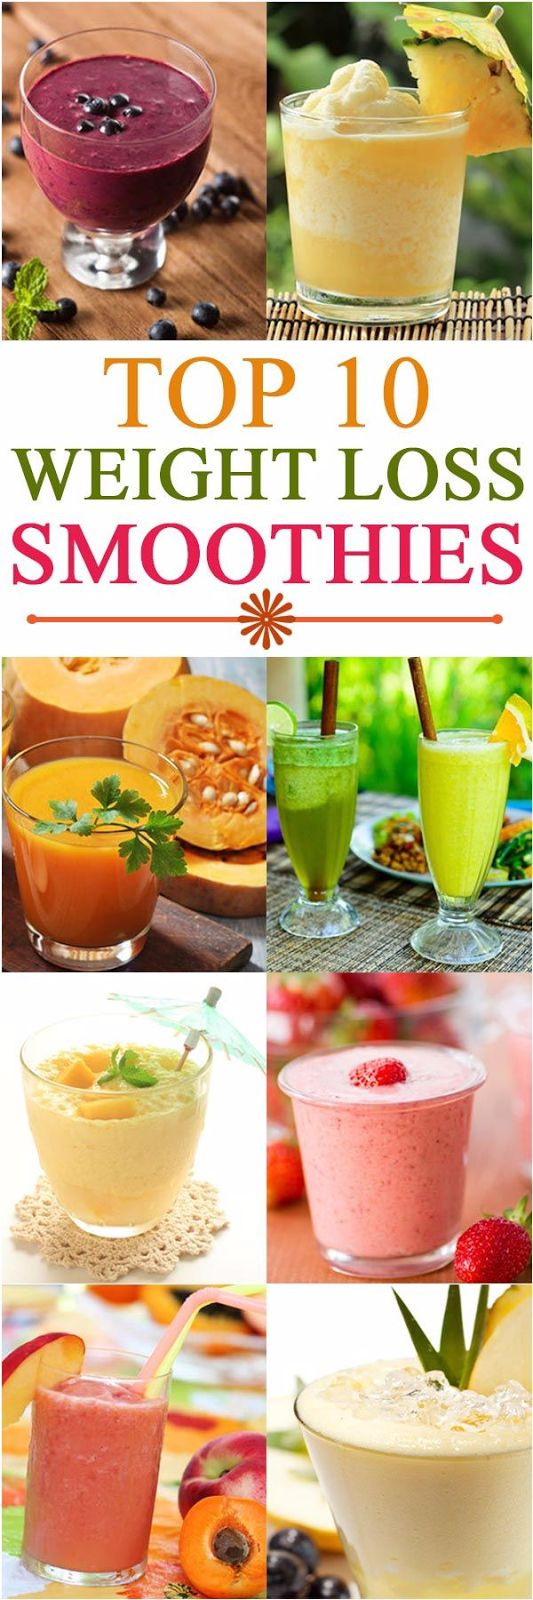 Weight Loss Breakfast Smoothies Recipes
 21 Weight Loss Smoothies With Recipes And Benefits